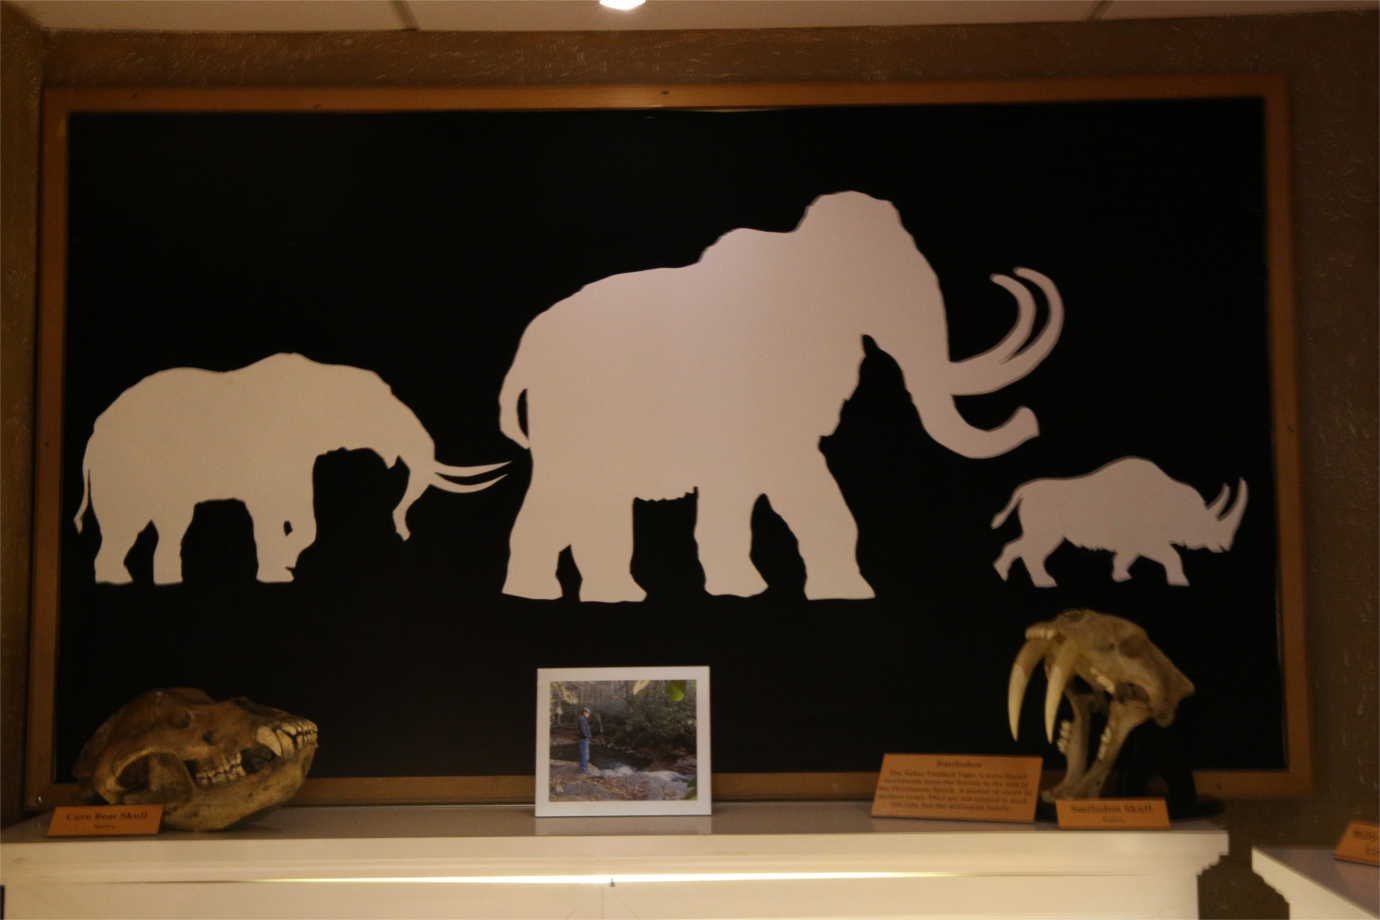 A display in the Ice Age Mammal Fossil Room. Photo courtesy of Davis & Elkins College, Stirrup Gallery, Reckling Collection.